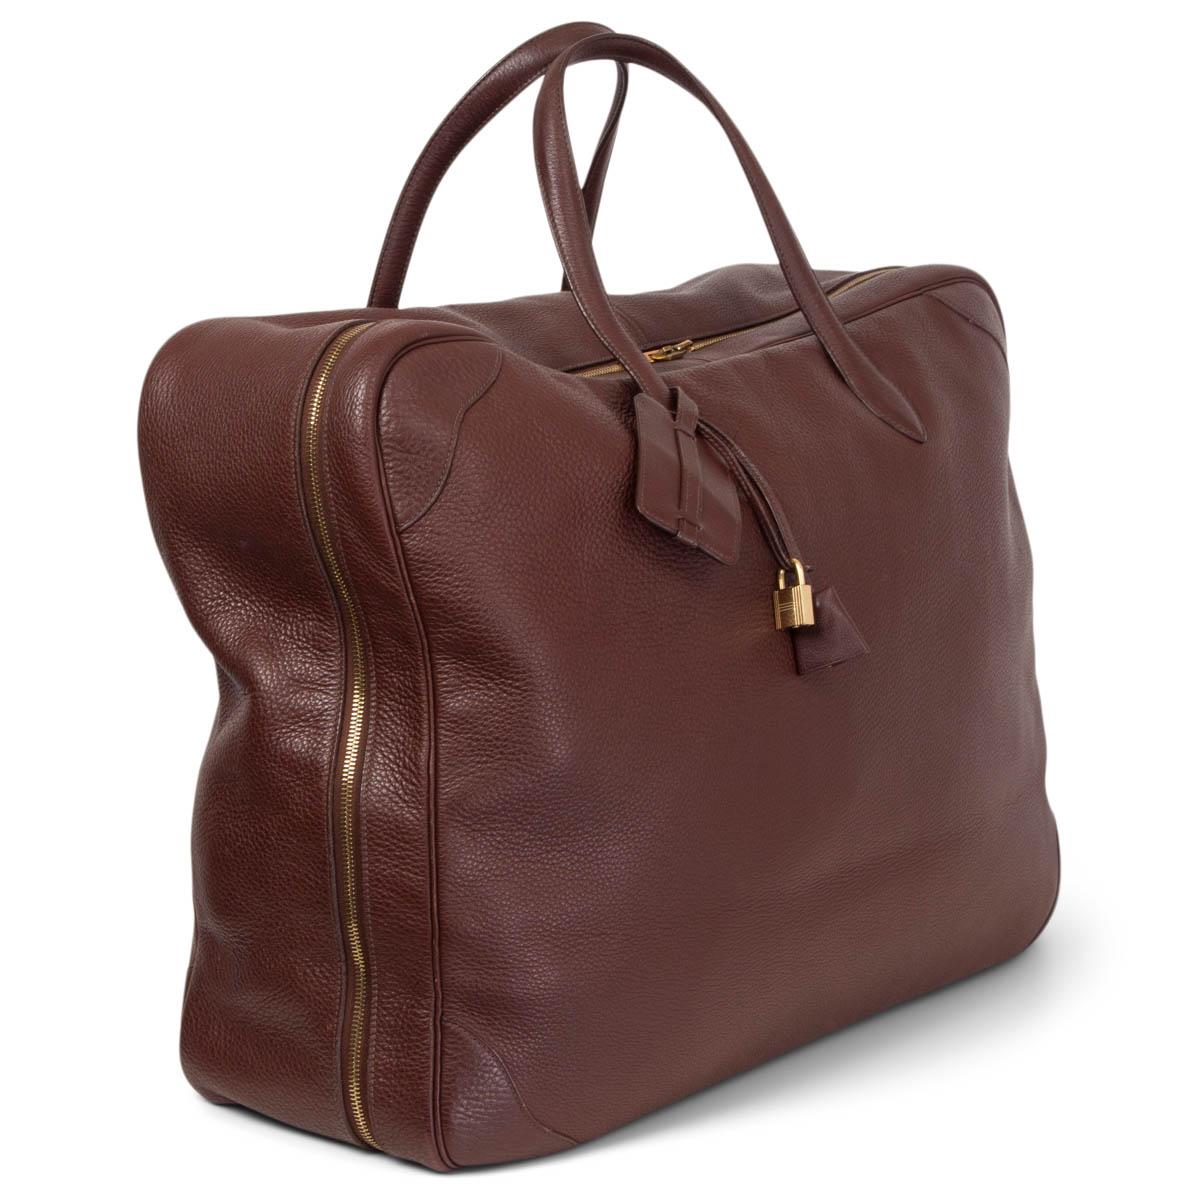 100% authentic Hermes Victoria 50 travelt bag in Havane (chestnut brown) Taurillon Clemence leather. Opens with a zipper. Lined in ivory fabric with two elastic straps. Has been carried and the bottom has fold and press marks as well as corner wear.